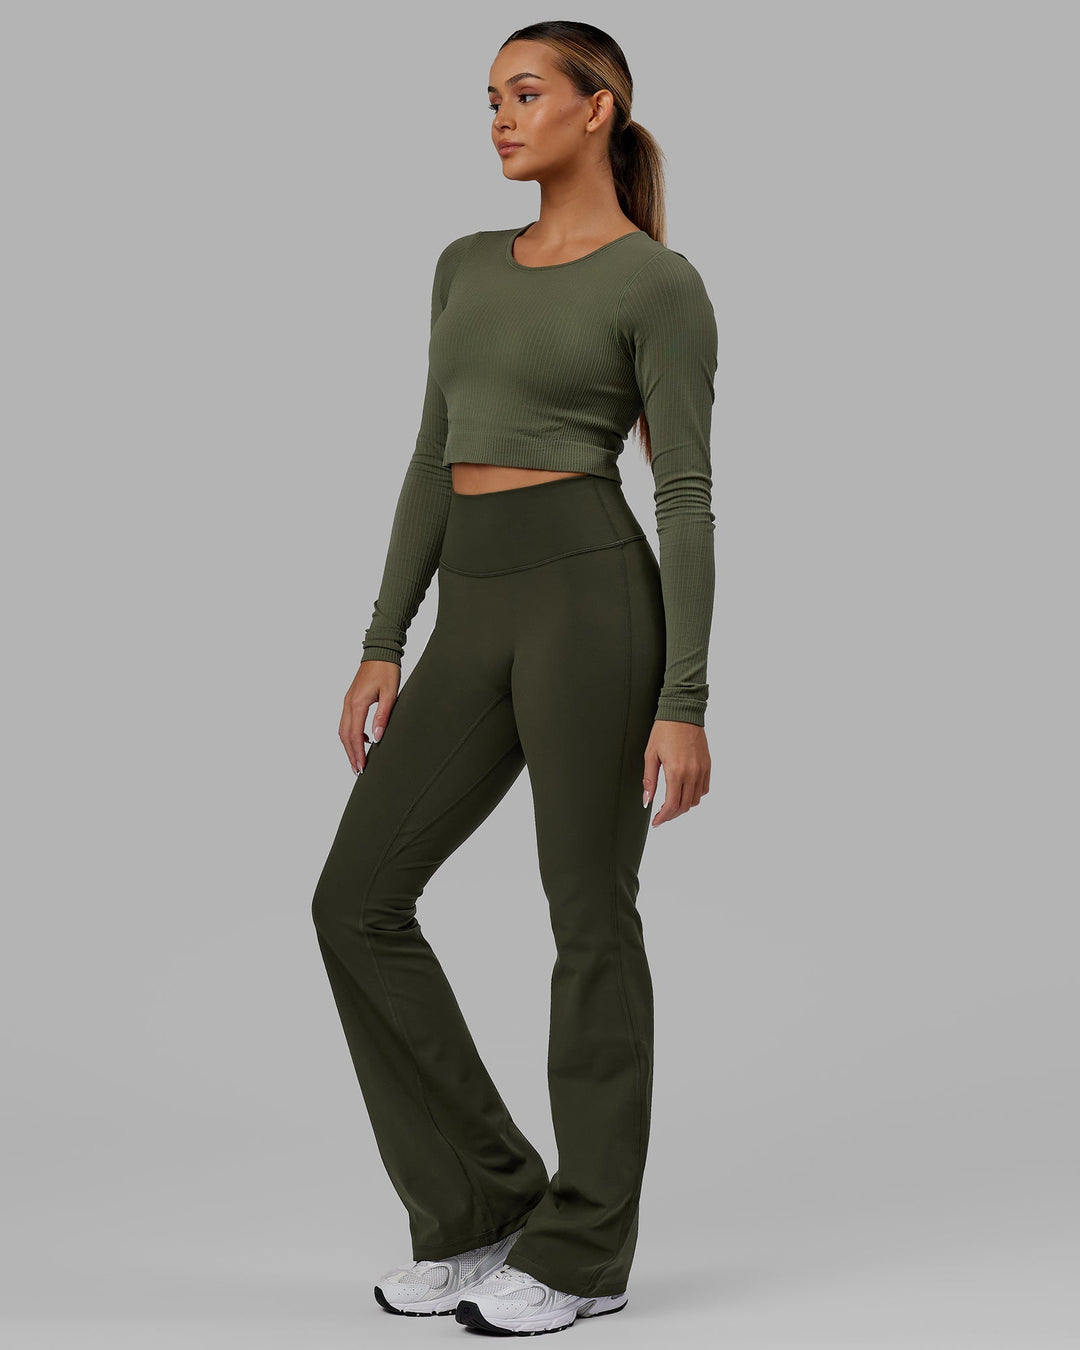 Ultra Soft Seamless LS Top - Olive Fade